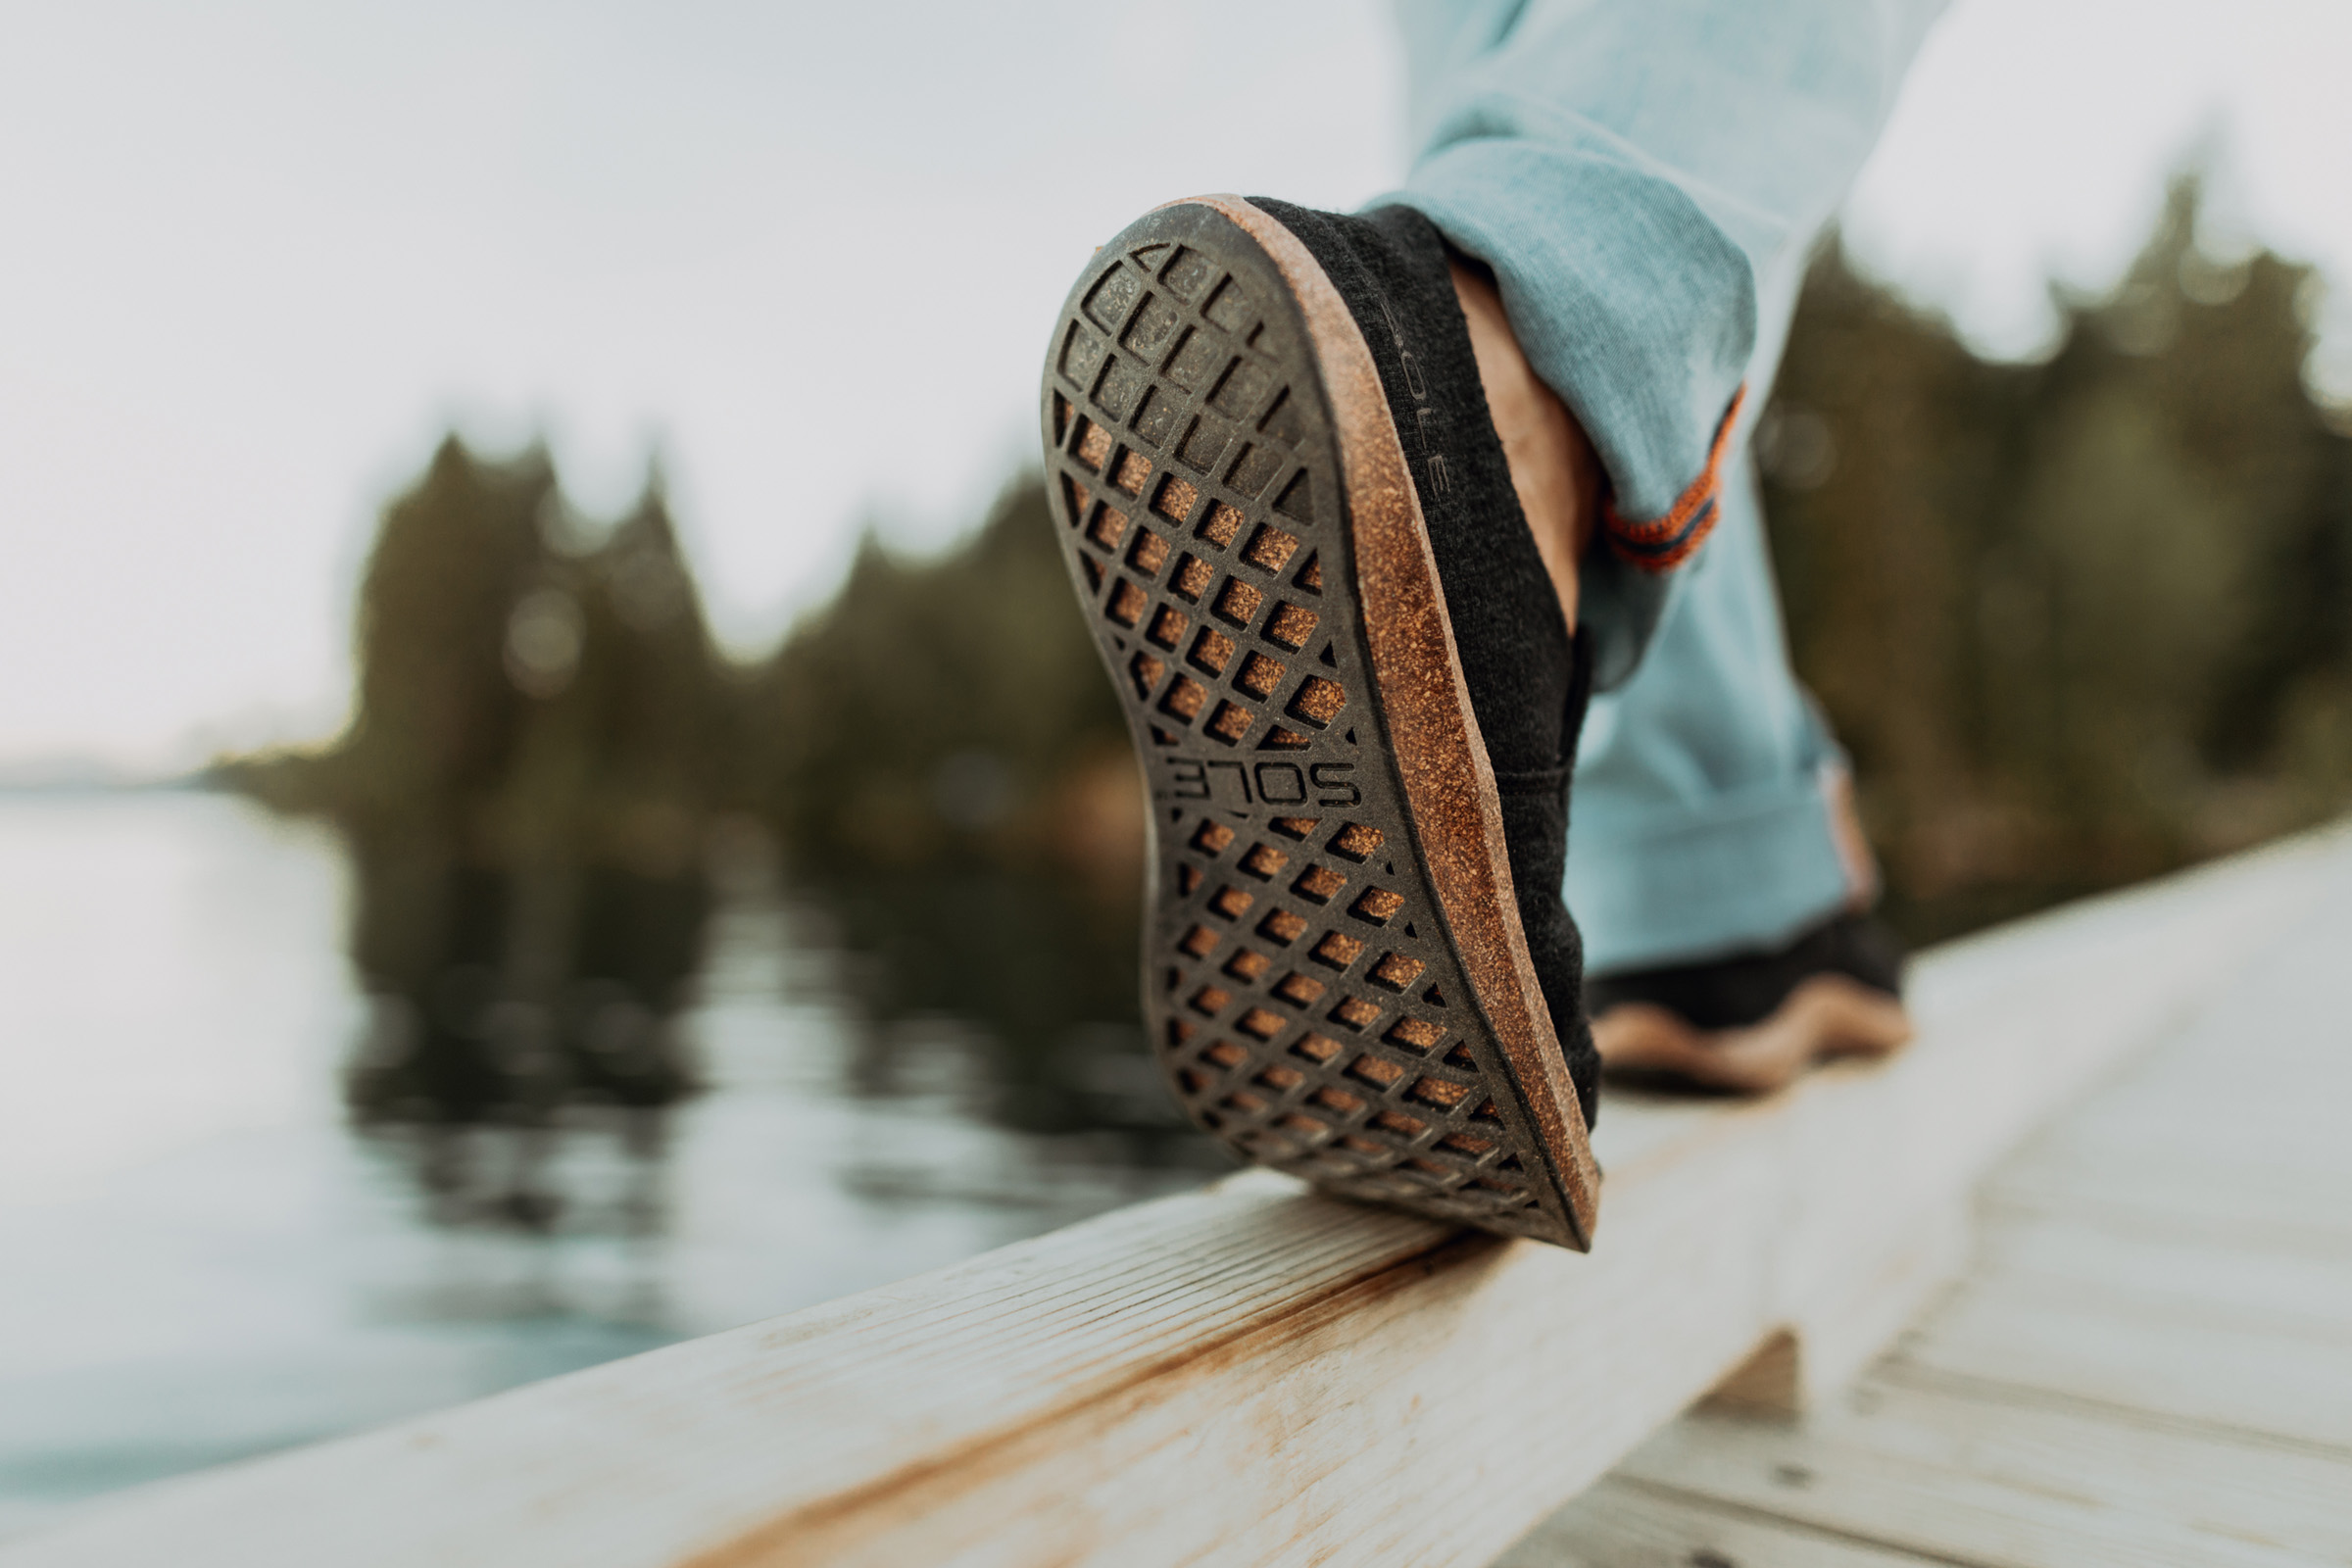 SOLE Launches in Stores this Winter with Eco-friendly Footwear Made ...